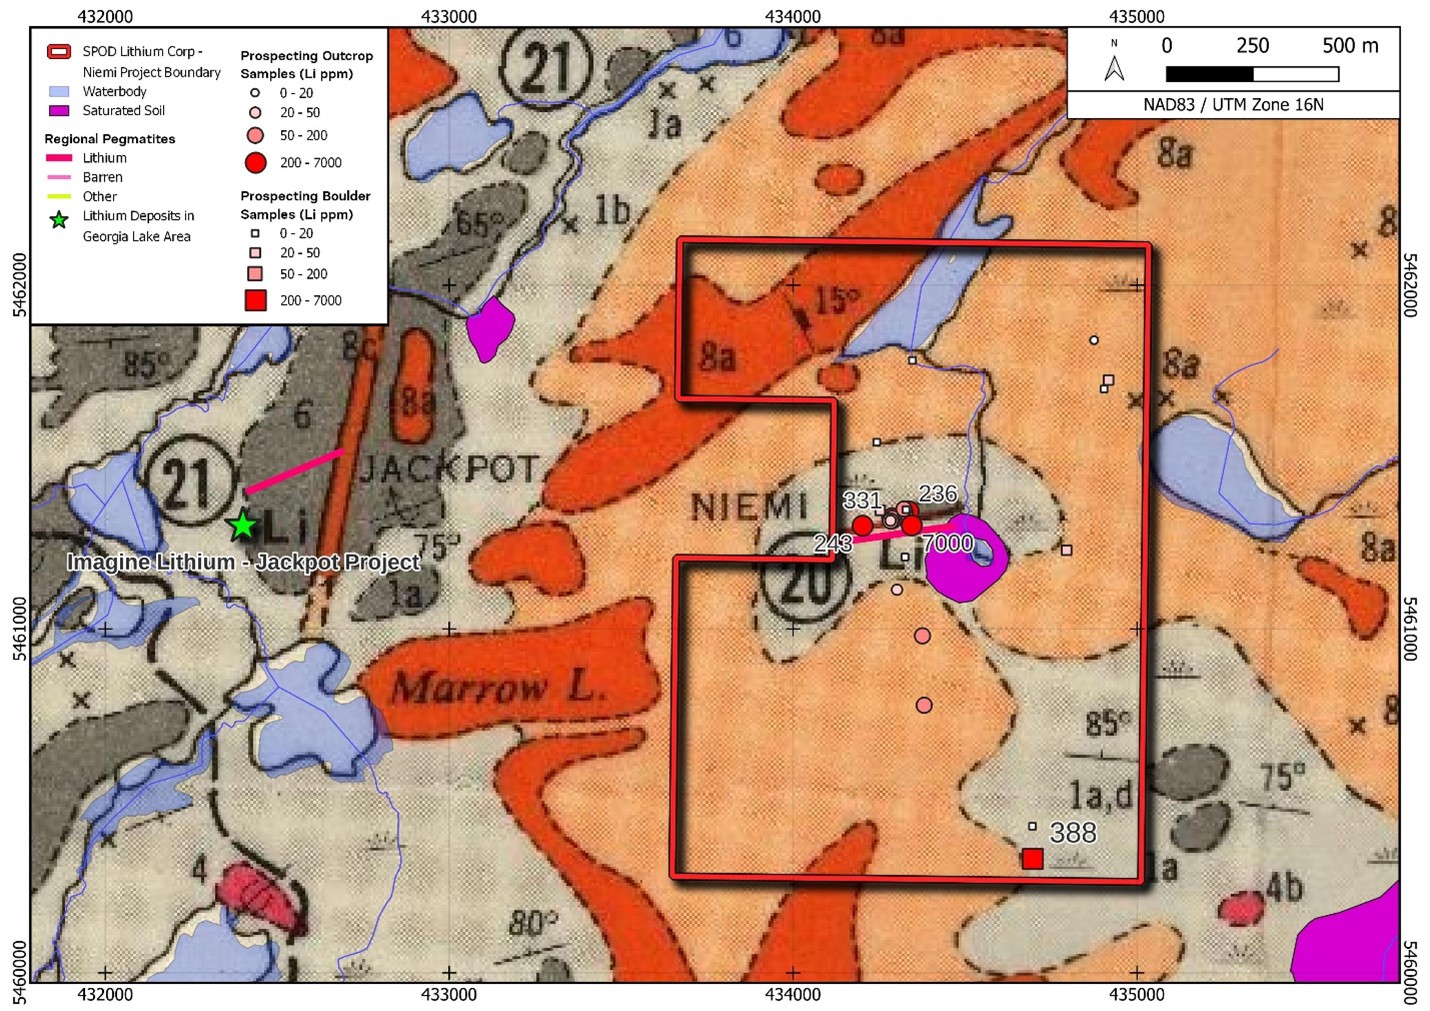 Figure 2 shows the Niemi Project samples with Imagine Lithium’s Jackpot Project to the west.